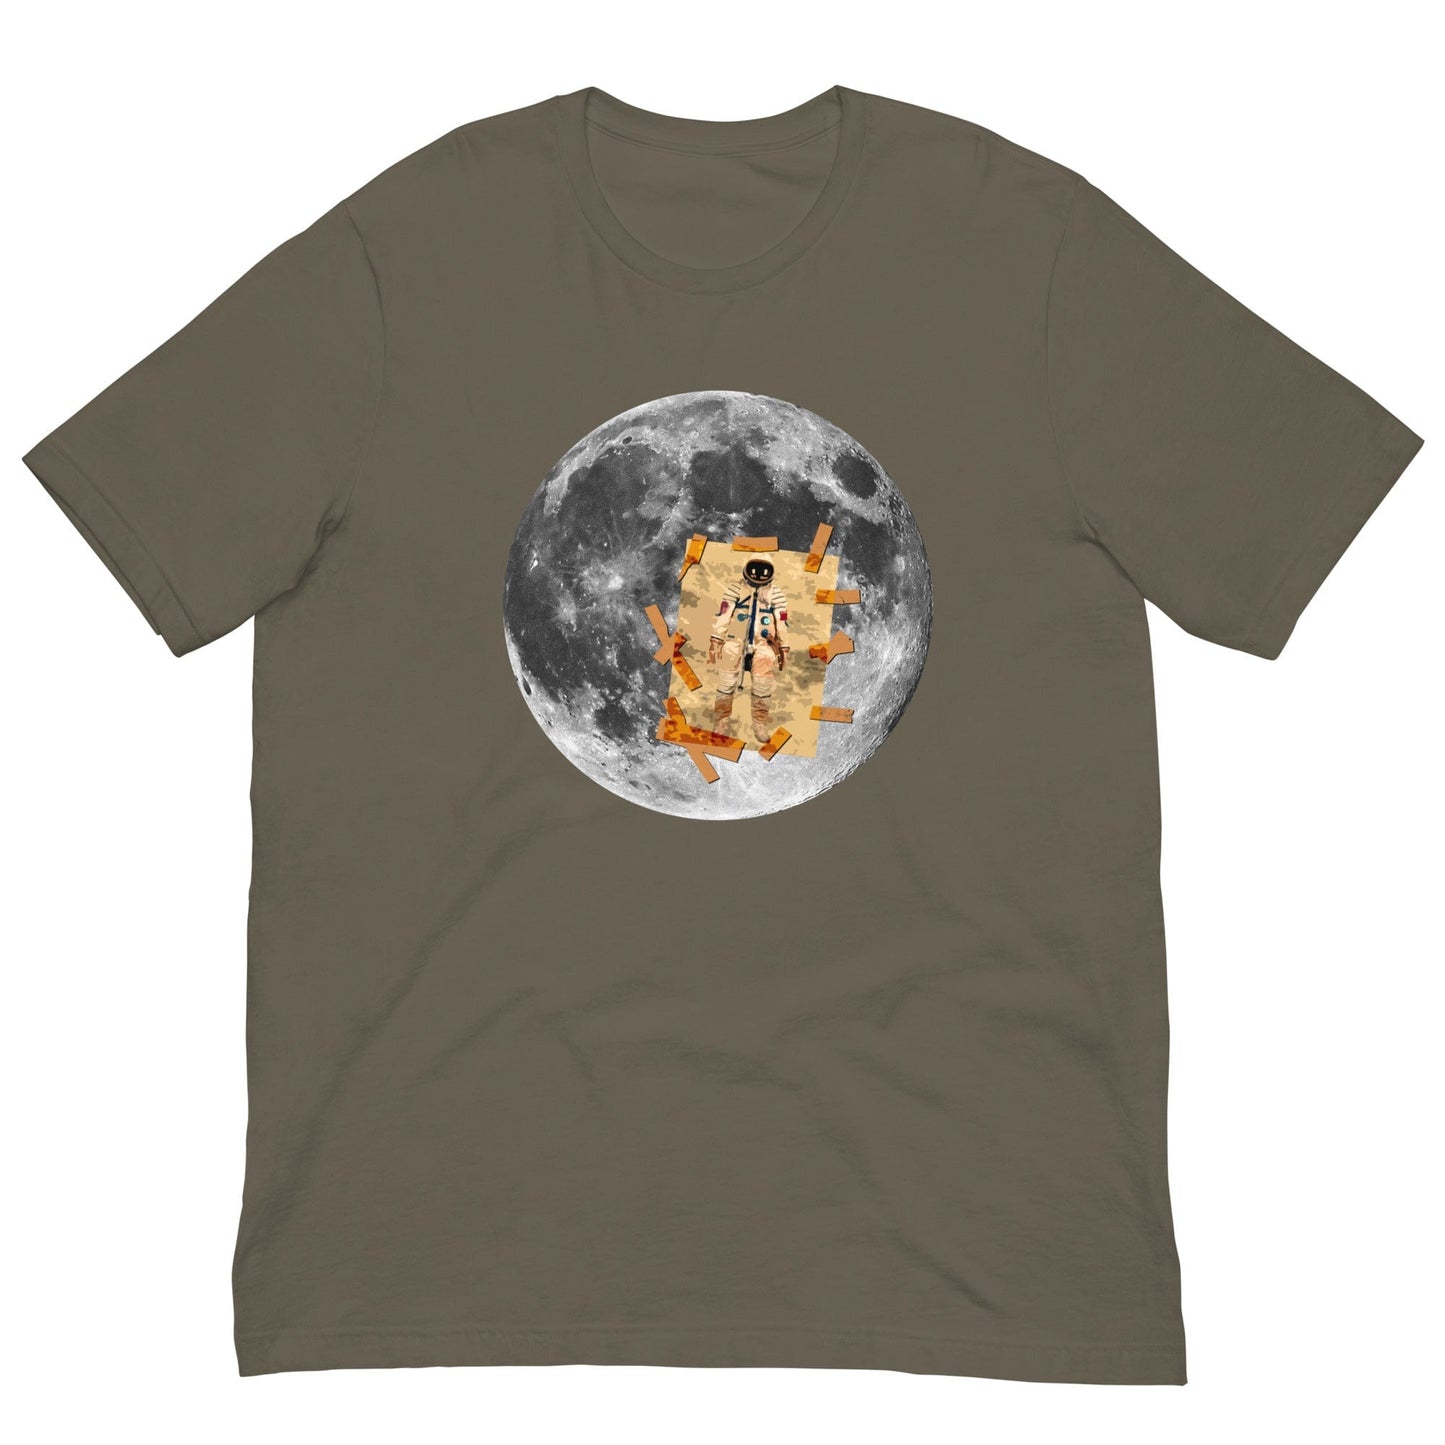 Man on the Moon T-shirt Army / S